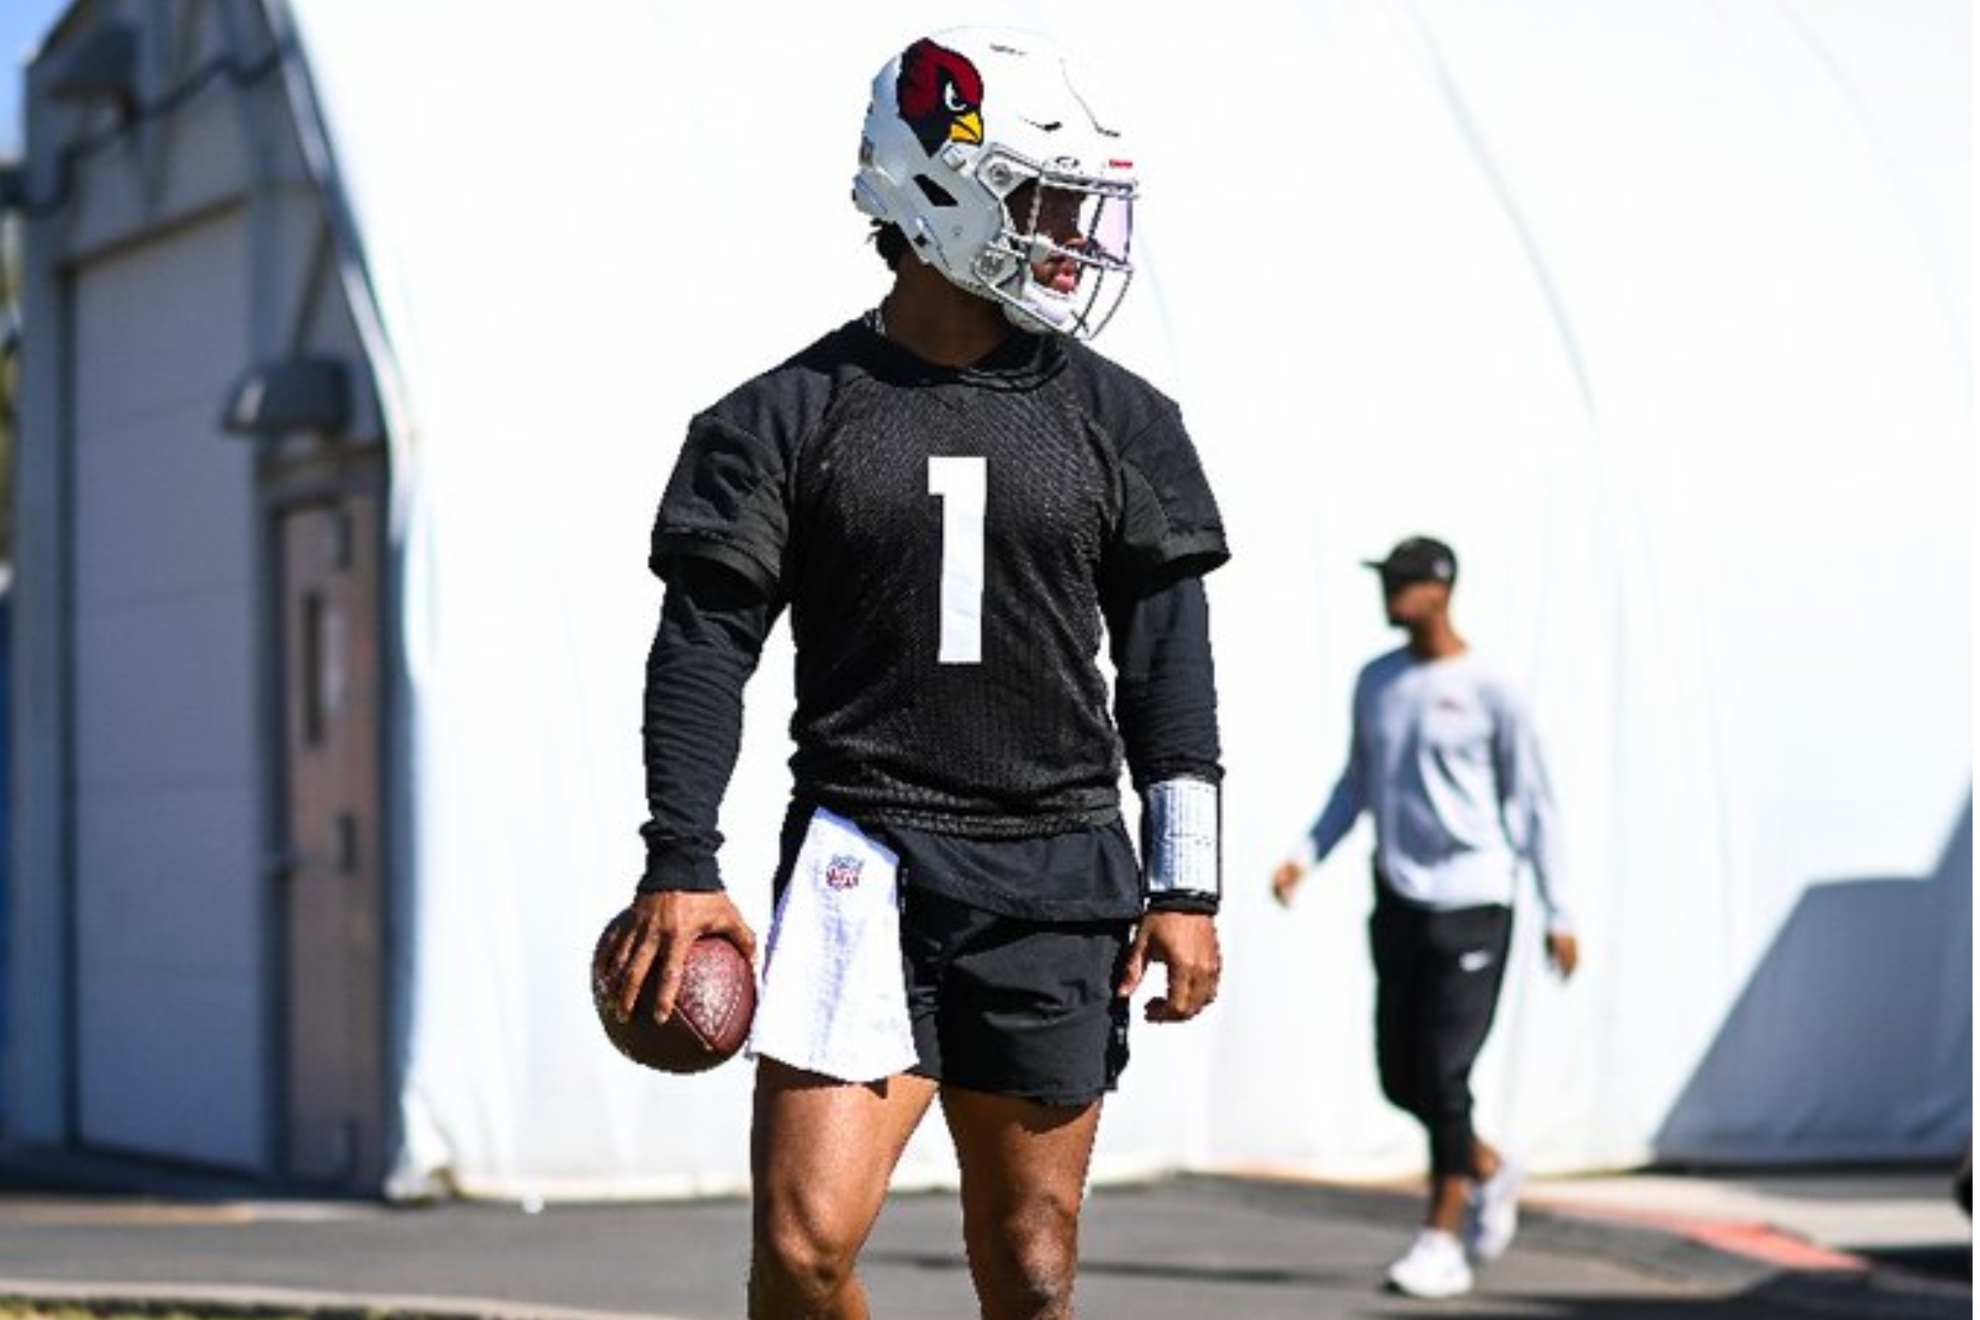 Cardinals quarterback, Kyler Murray, was a full participant in Wednesday's practice